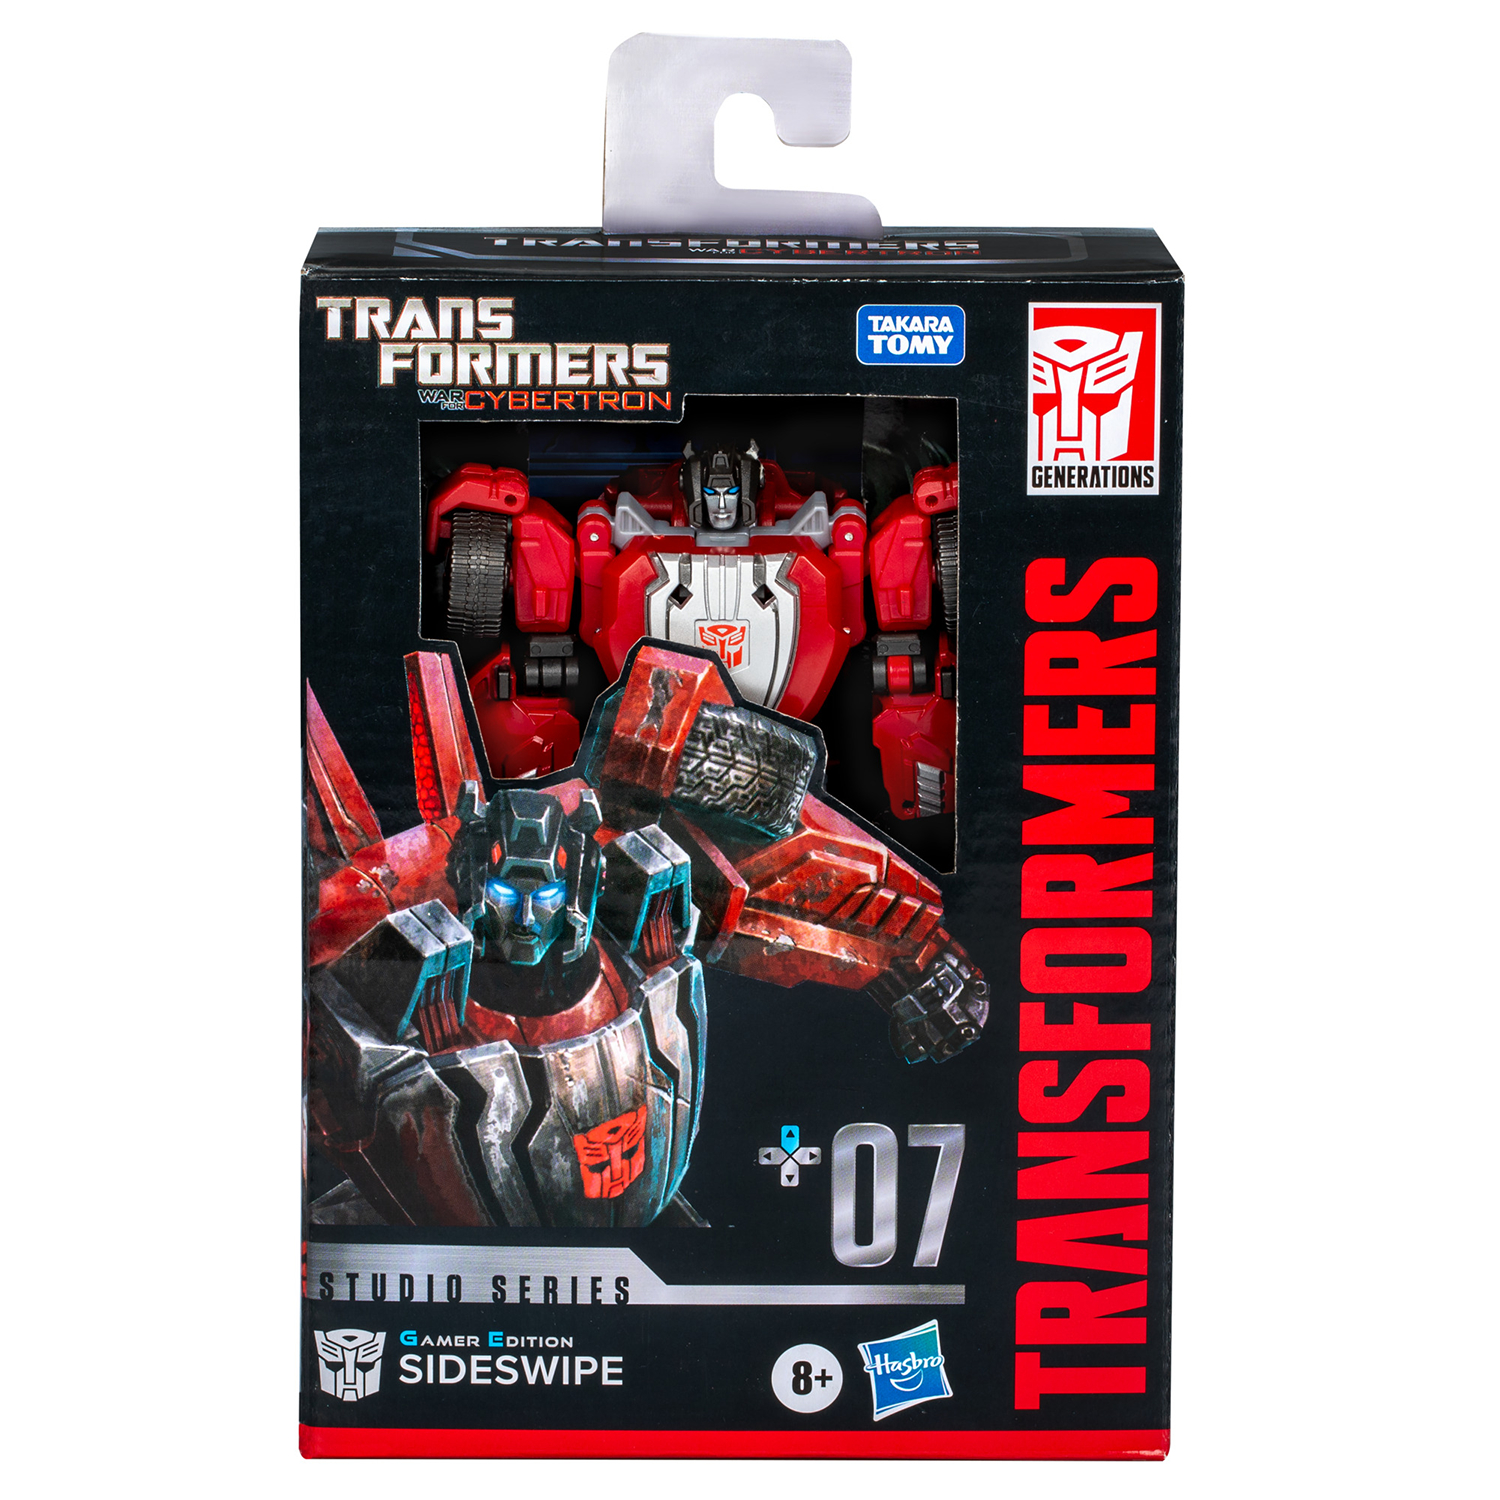 Transformers Studio Series Deluxe War for Cybertron Gamer Edition Sideswipe Action Figure